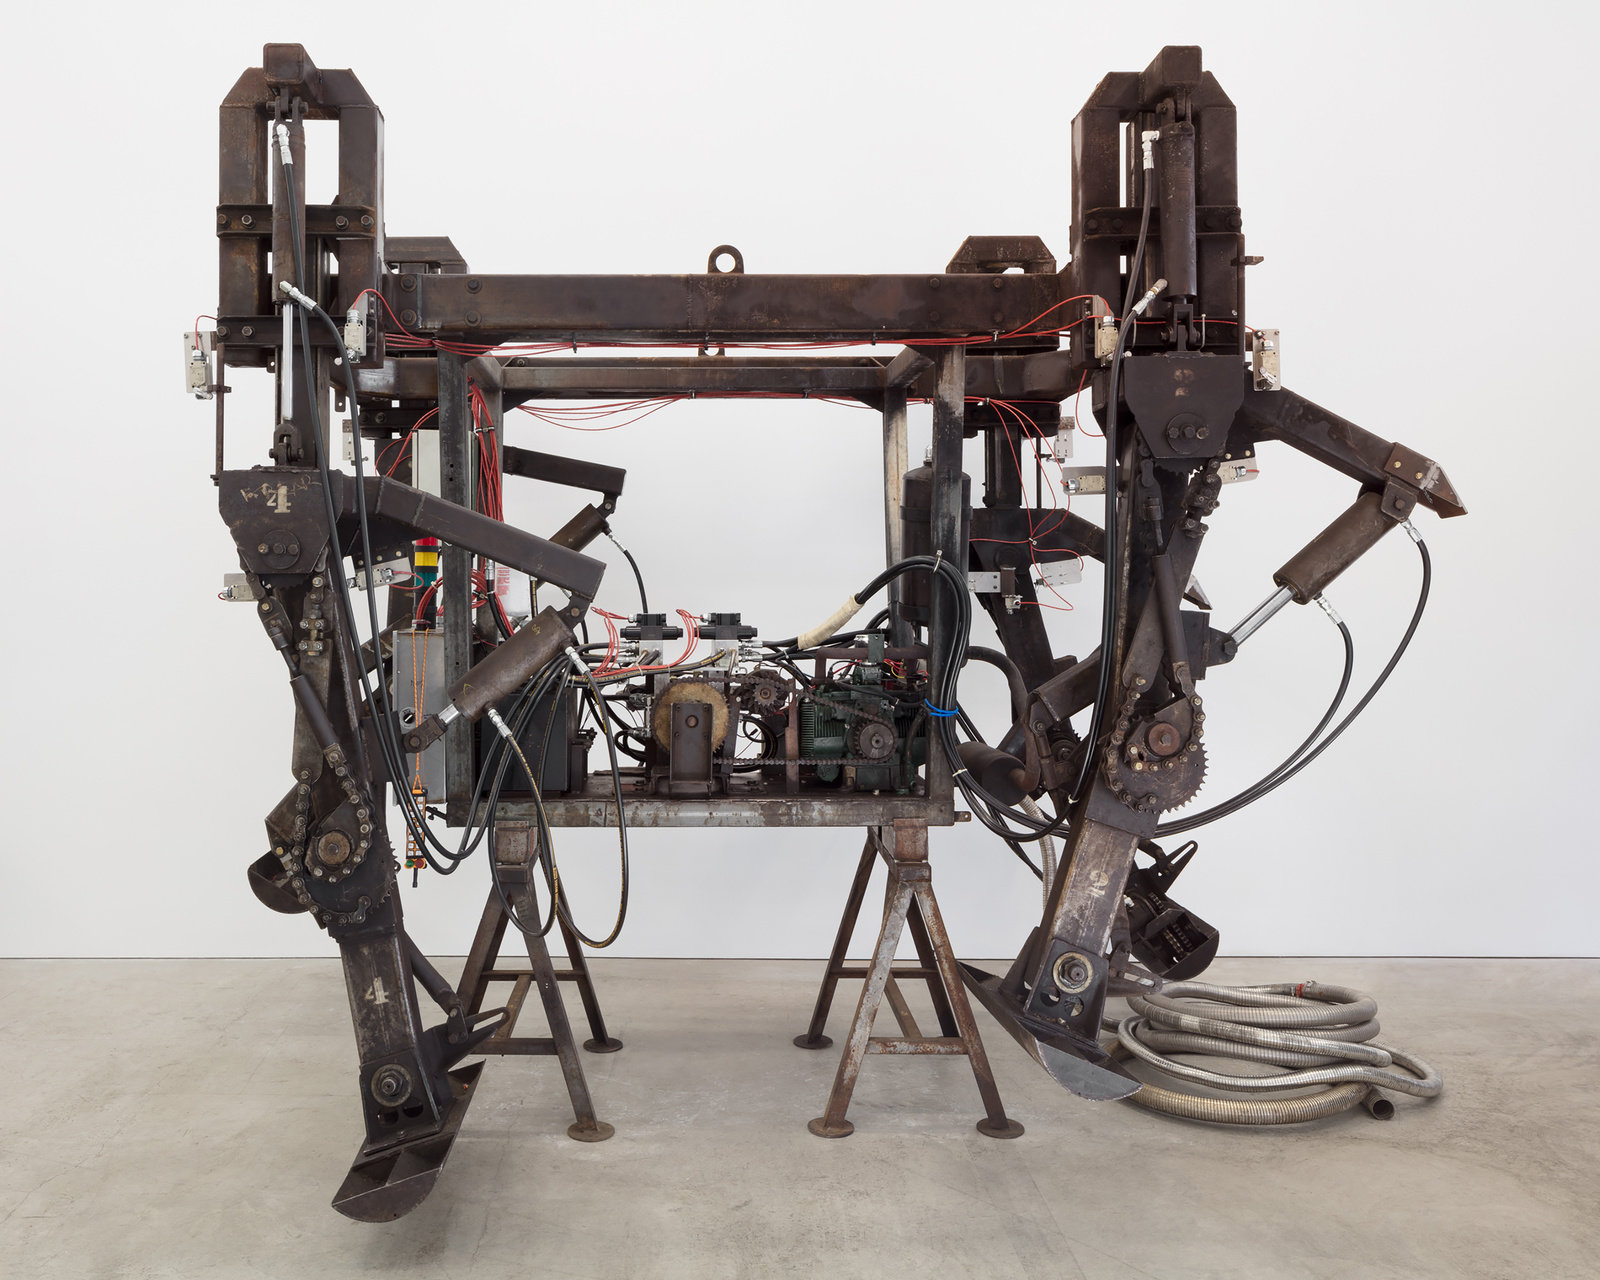 Srl, the big walker, 1986 2017, steel, aluminum, plastic, dyneema rope, remote control, electric powered, 104 x 133 x 92 in., 264.2 x 337.8 x 233.7 cm, cnon 59.718 pierre le hors